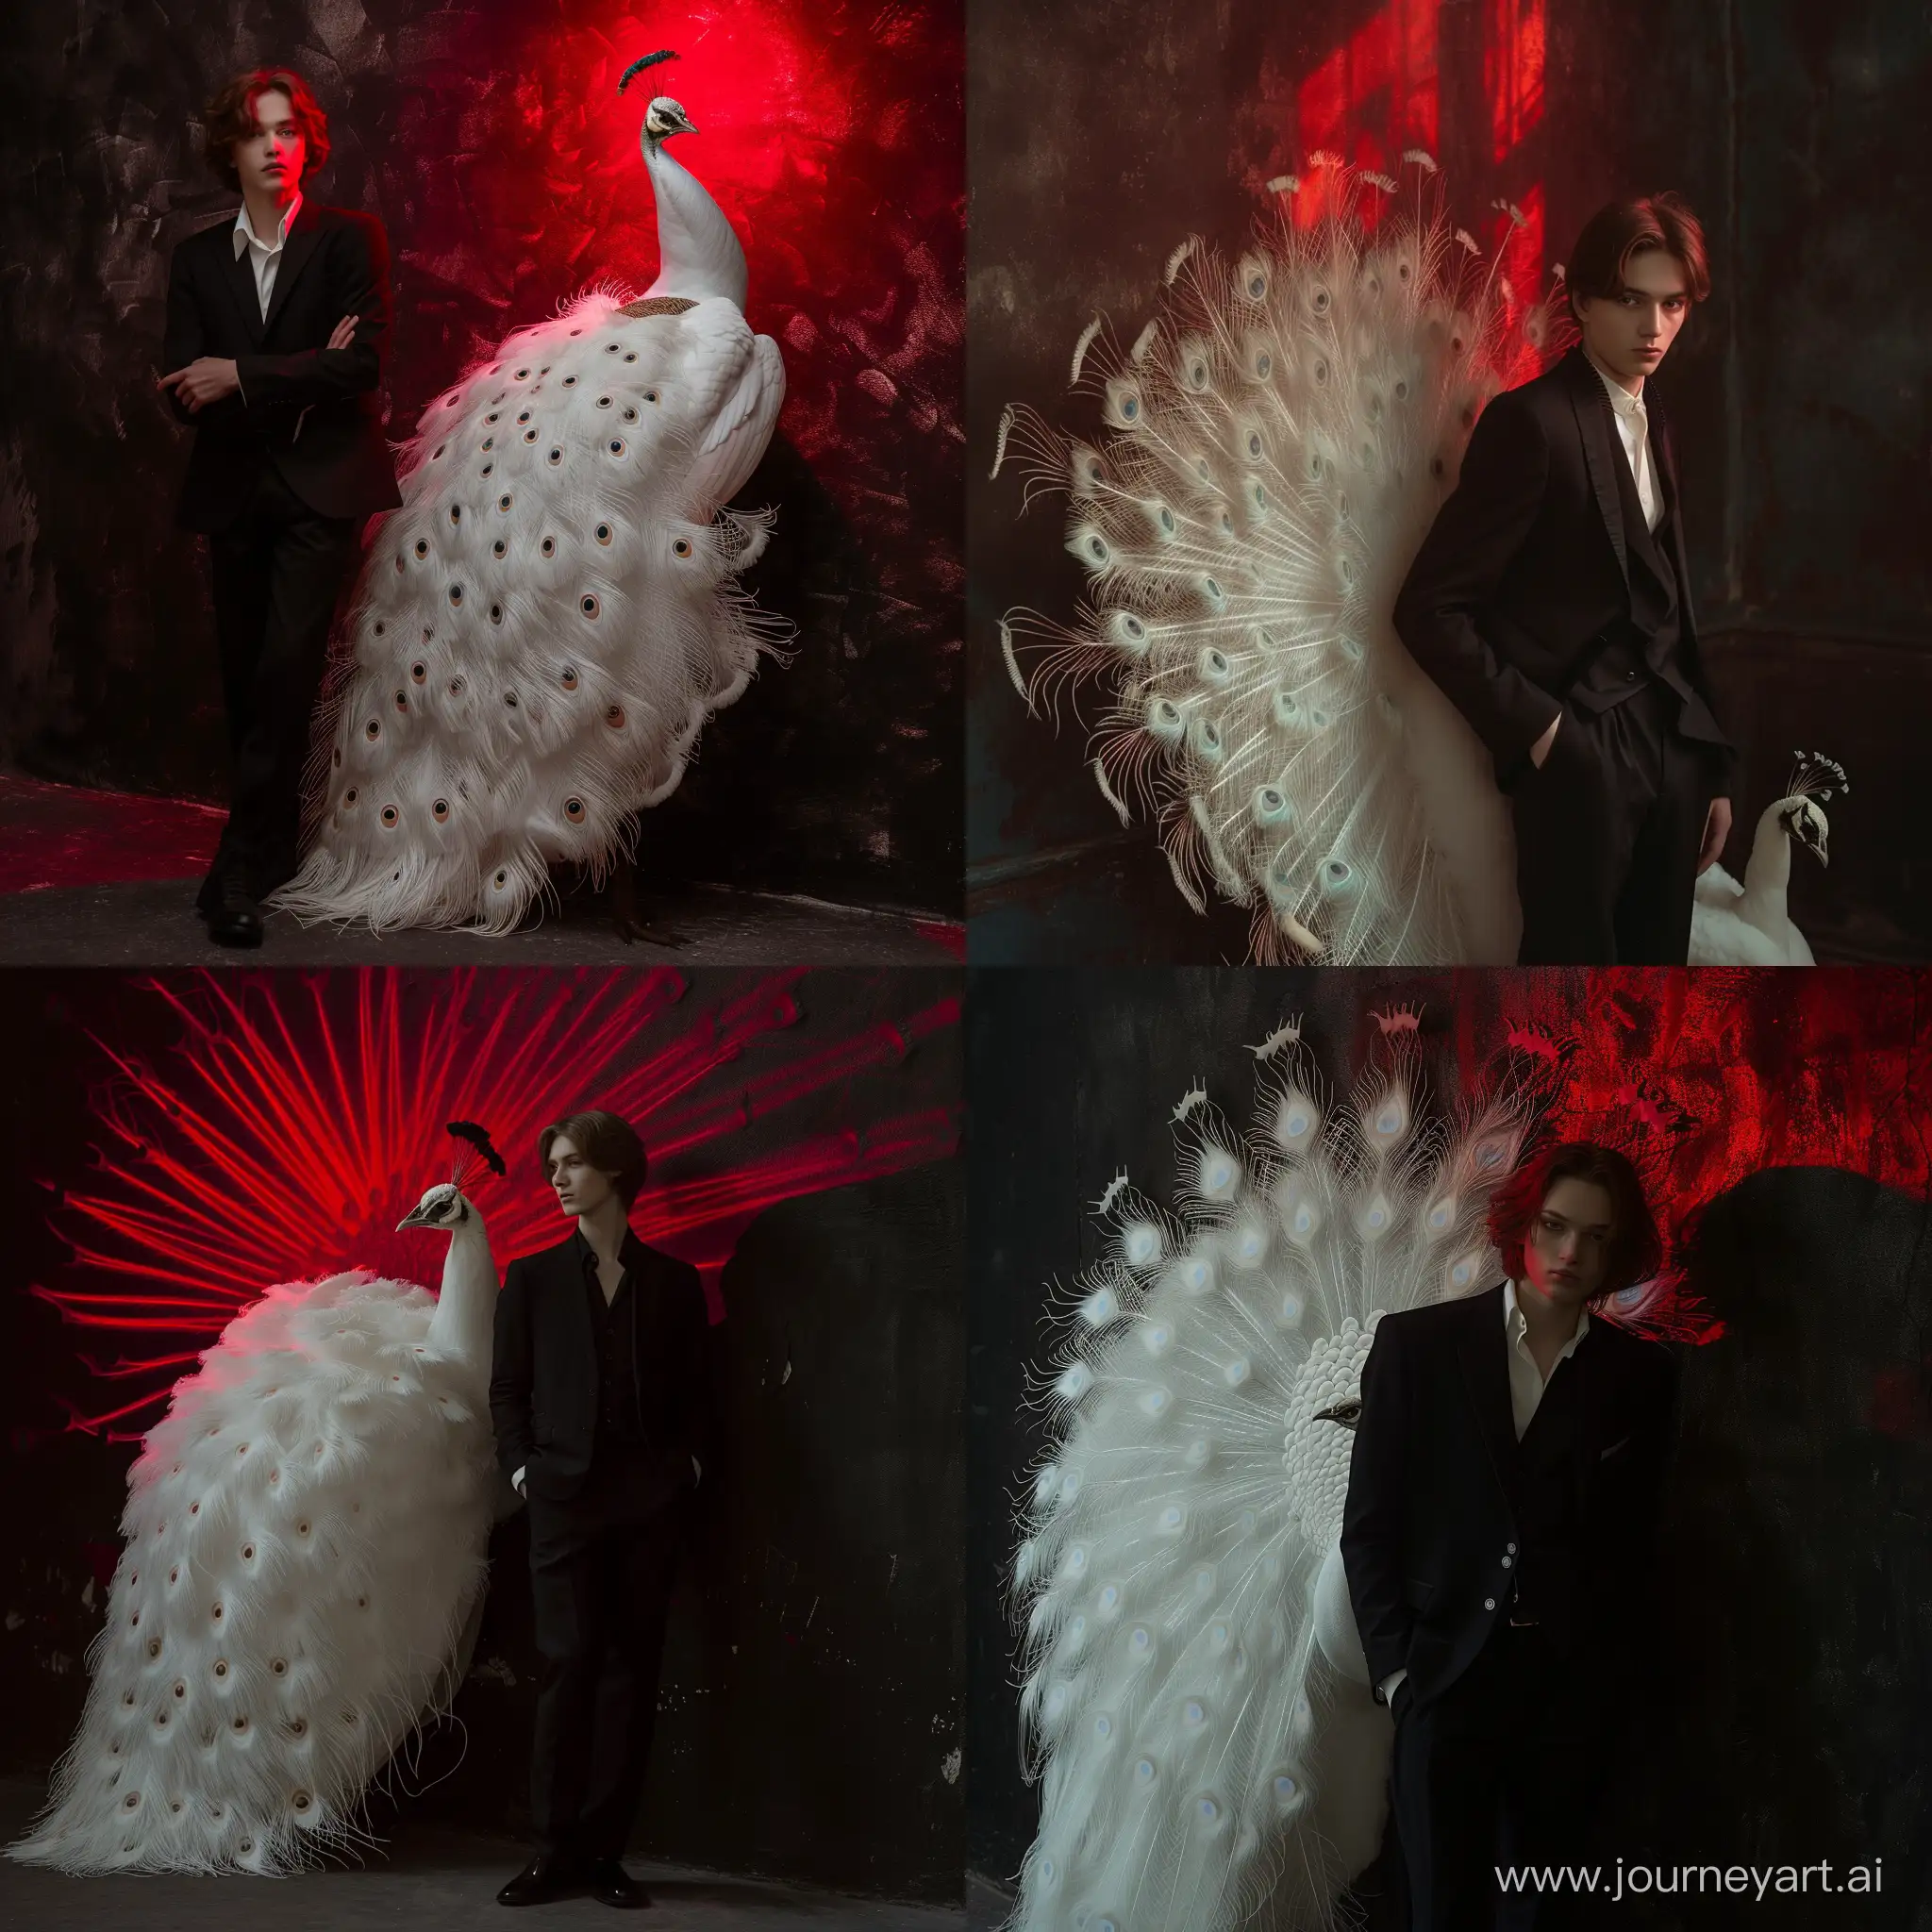 Stylish-19YearOld-Russian-Model-in-Black-Suit-Poses-with-Majestic-White-Peacock-in-Studio